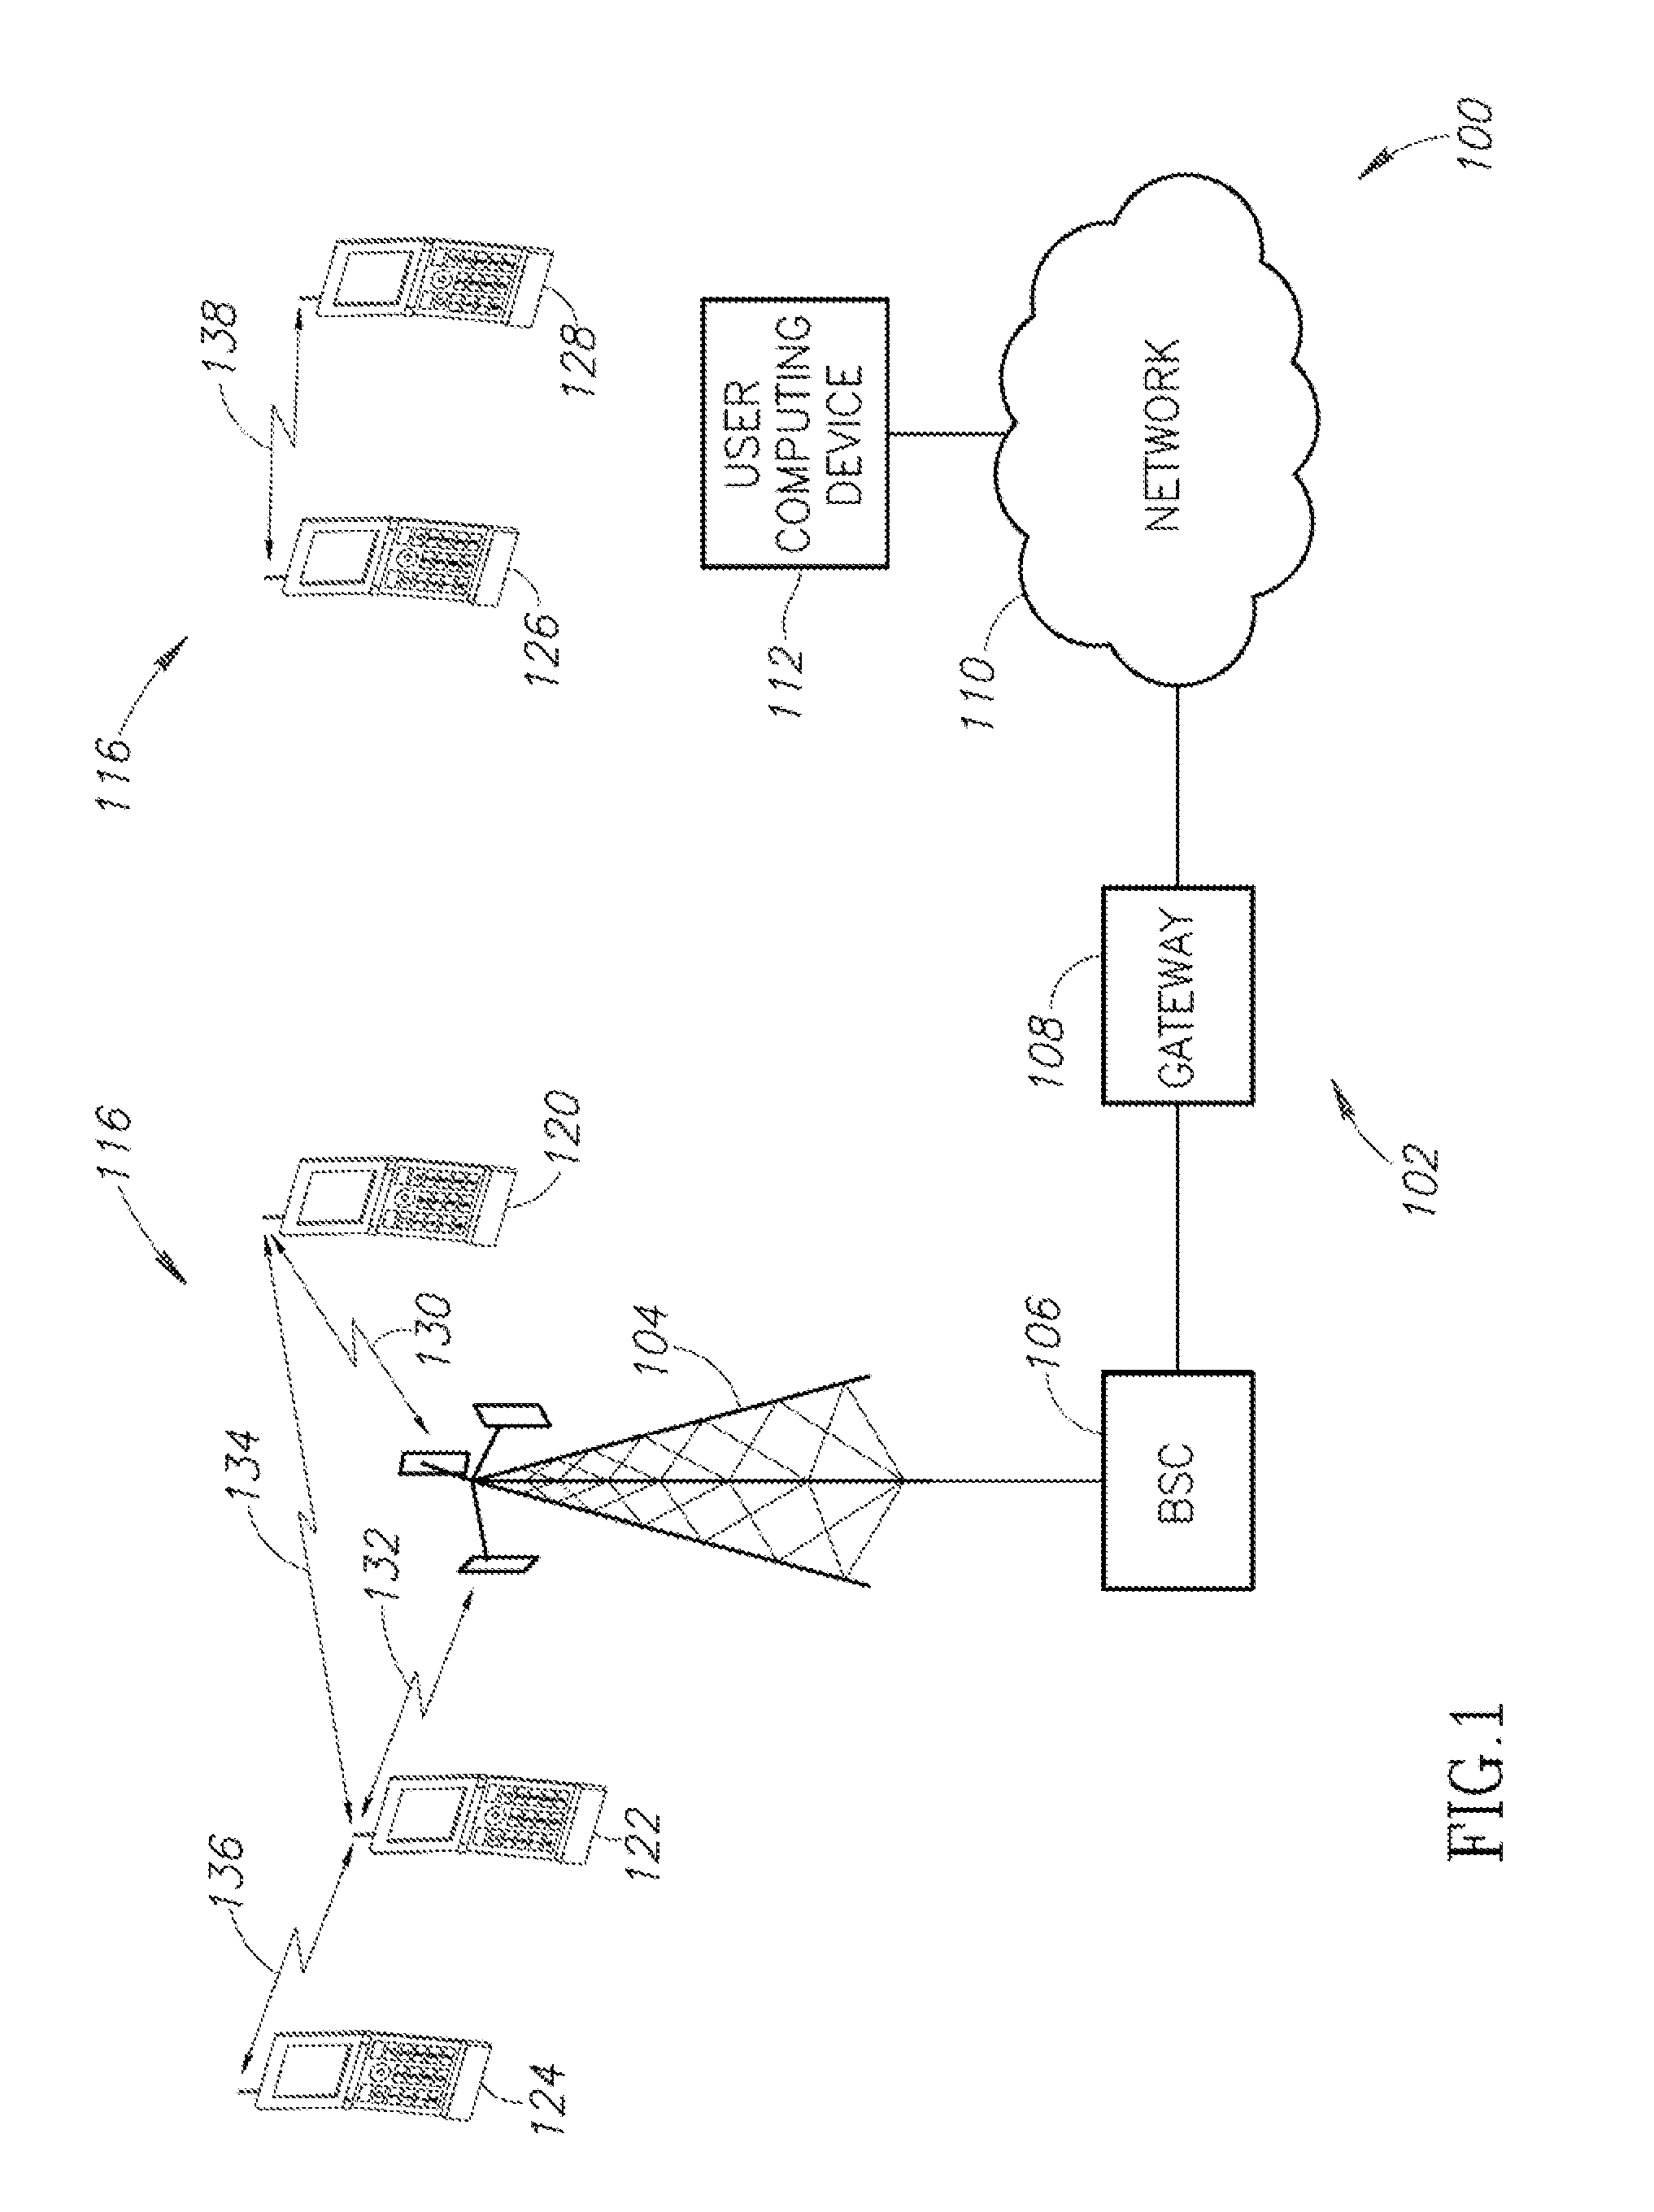 System and method for wireless communication in an educational setting